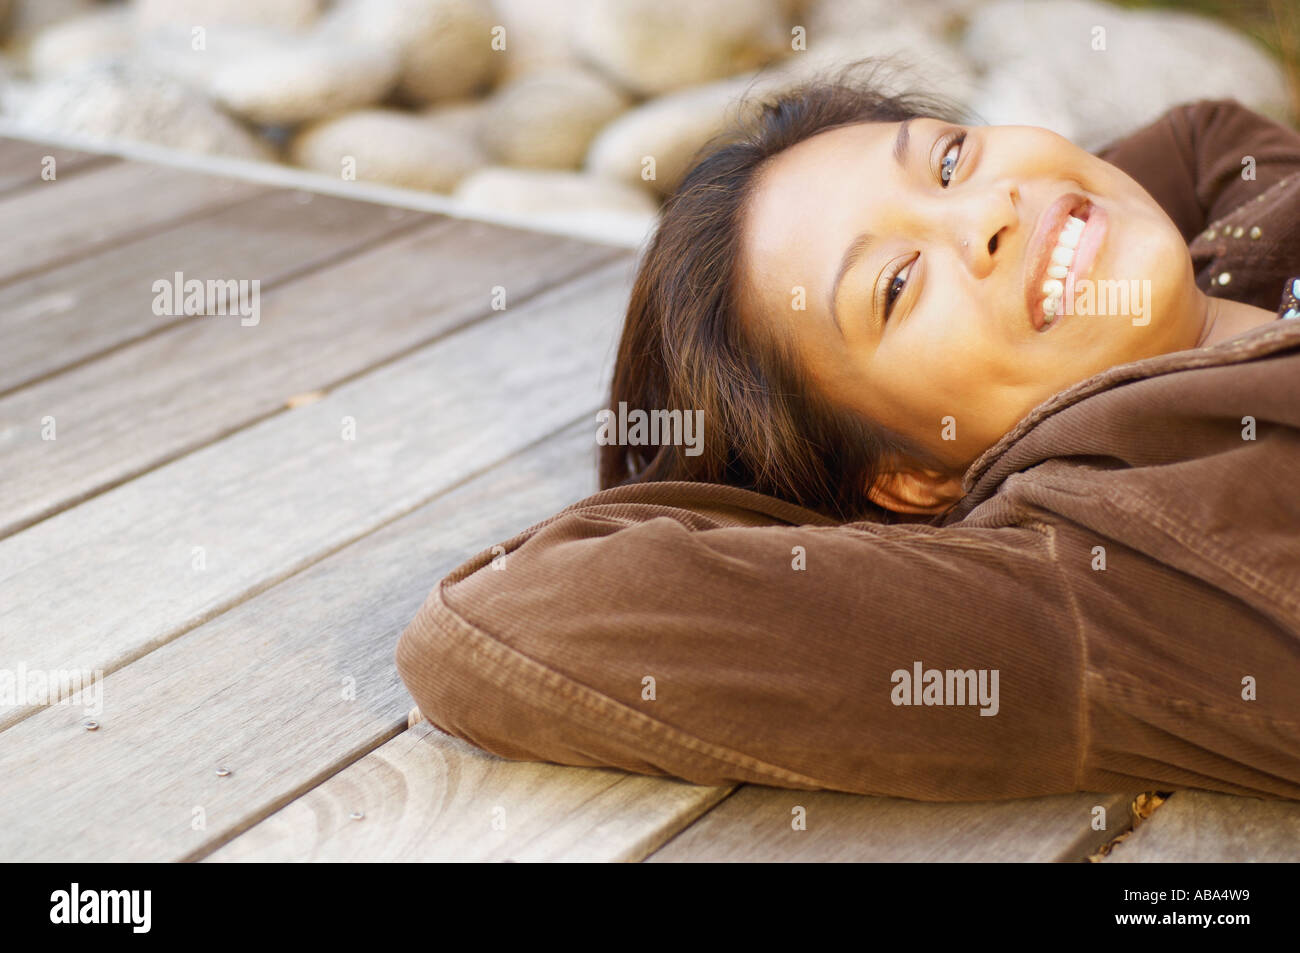 Young woman relaxing on wood deck Stock Photo